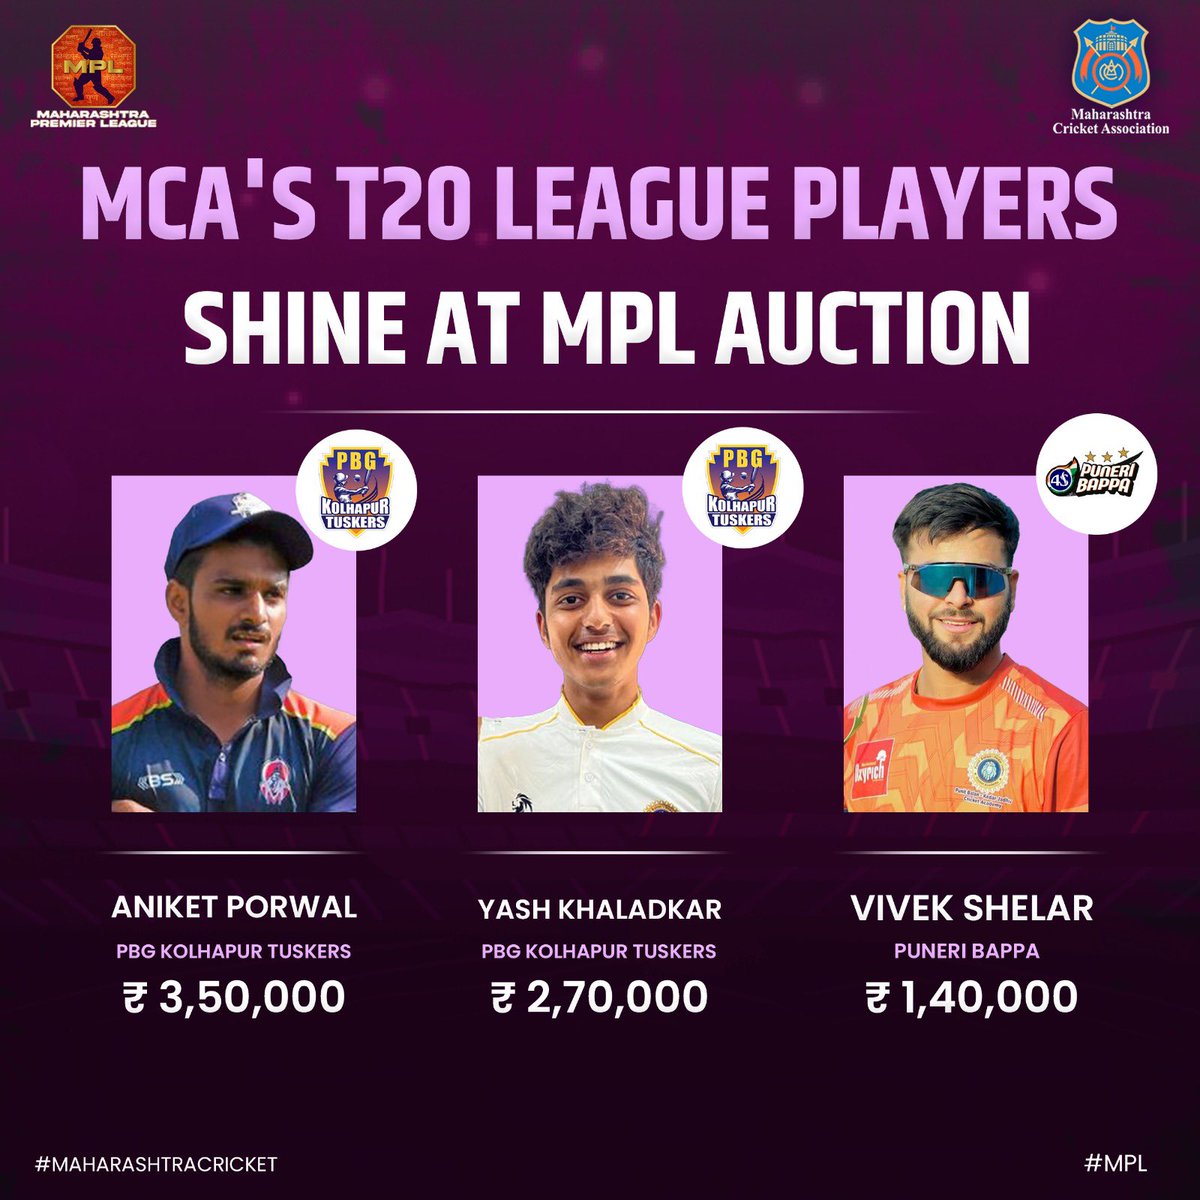 MCA’s T20 League Players Shine in the MPL Auction as franchisees bid for them, taking a note of their performance in the T20 tournament. #mpl #mca #cricket #maharashtracricket #mplauction #t20tournment